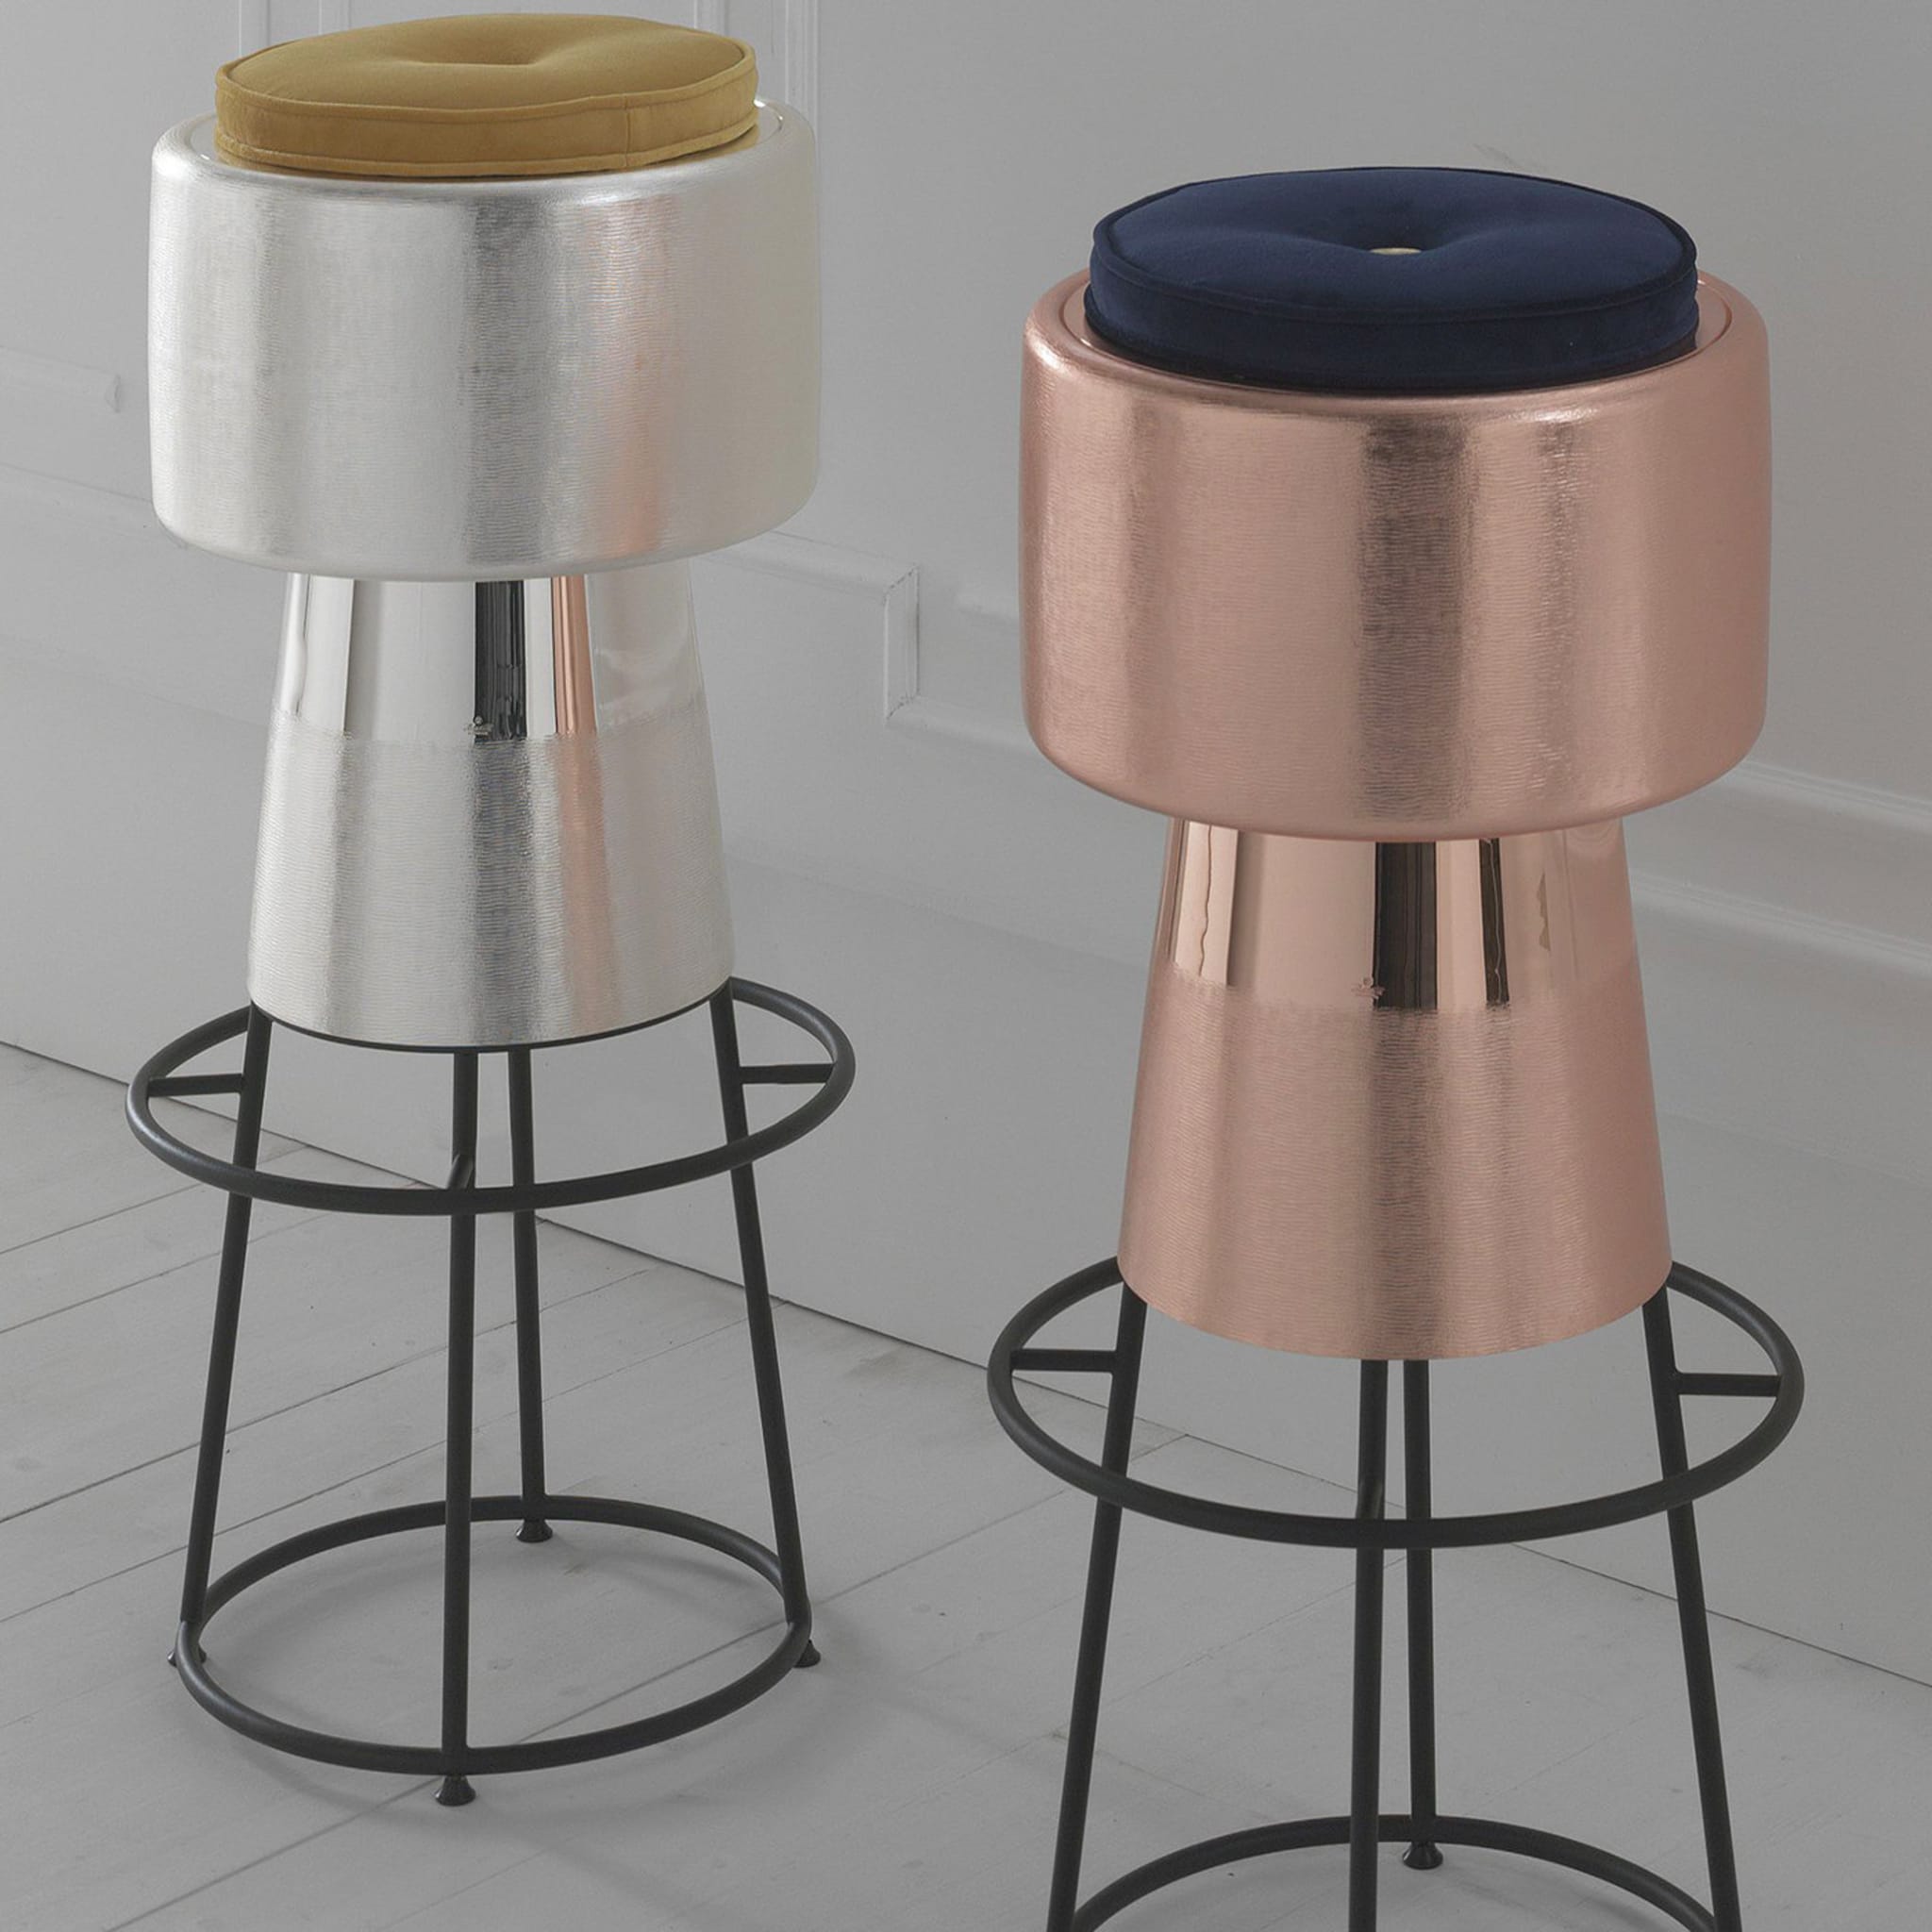 Tappo Silver Bar Stool by NOOII - Alternative view 1